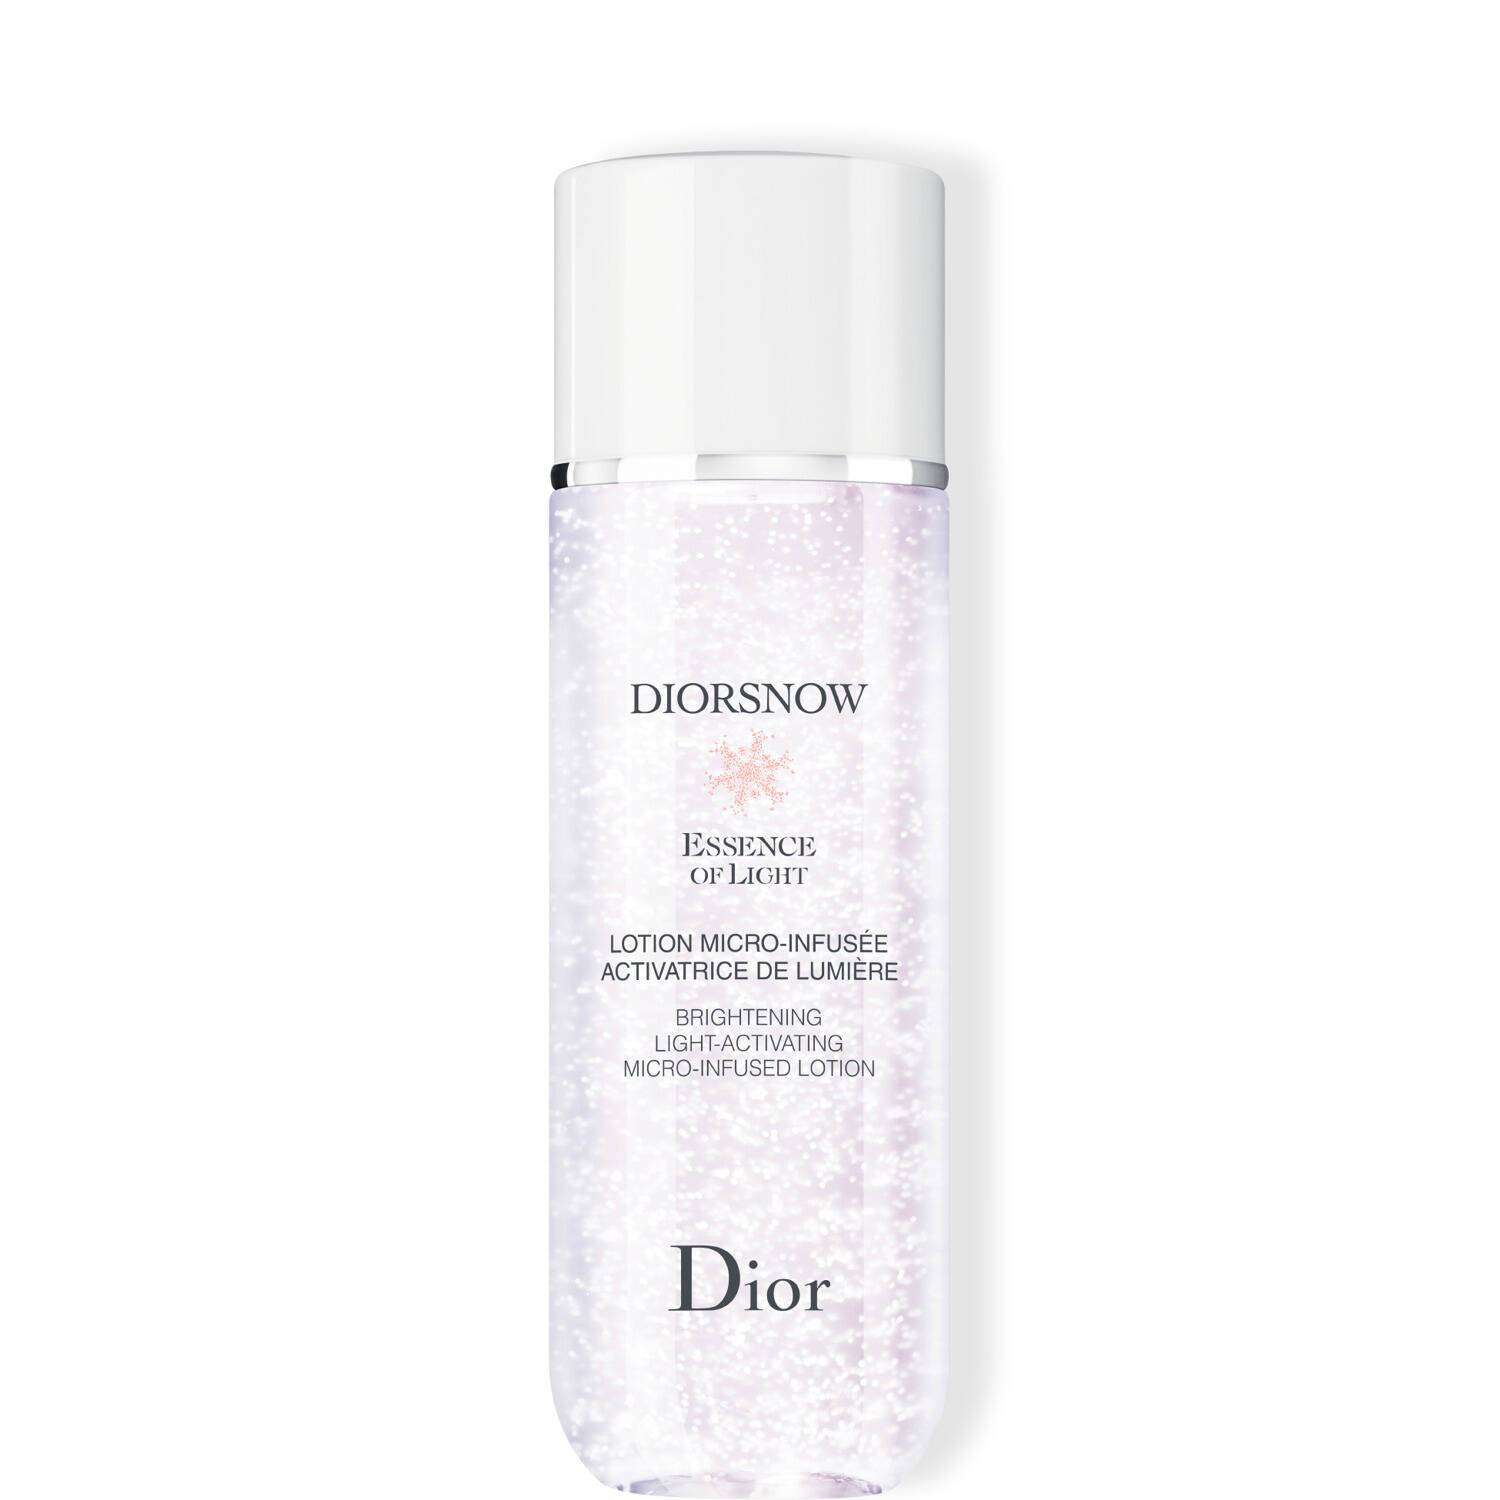 CDR DIORSNOW MICRO-INFUSED LOTION 